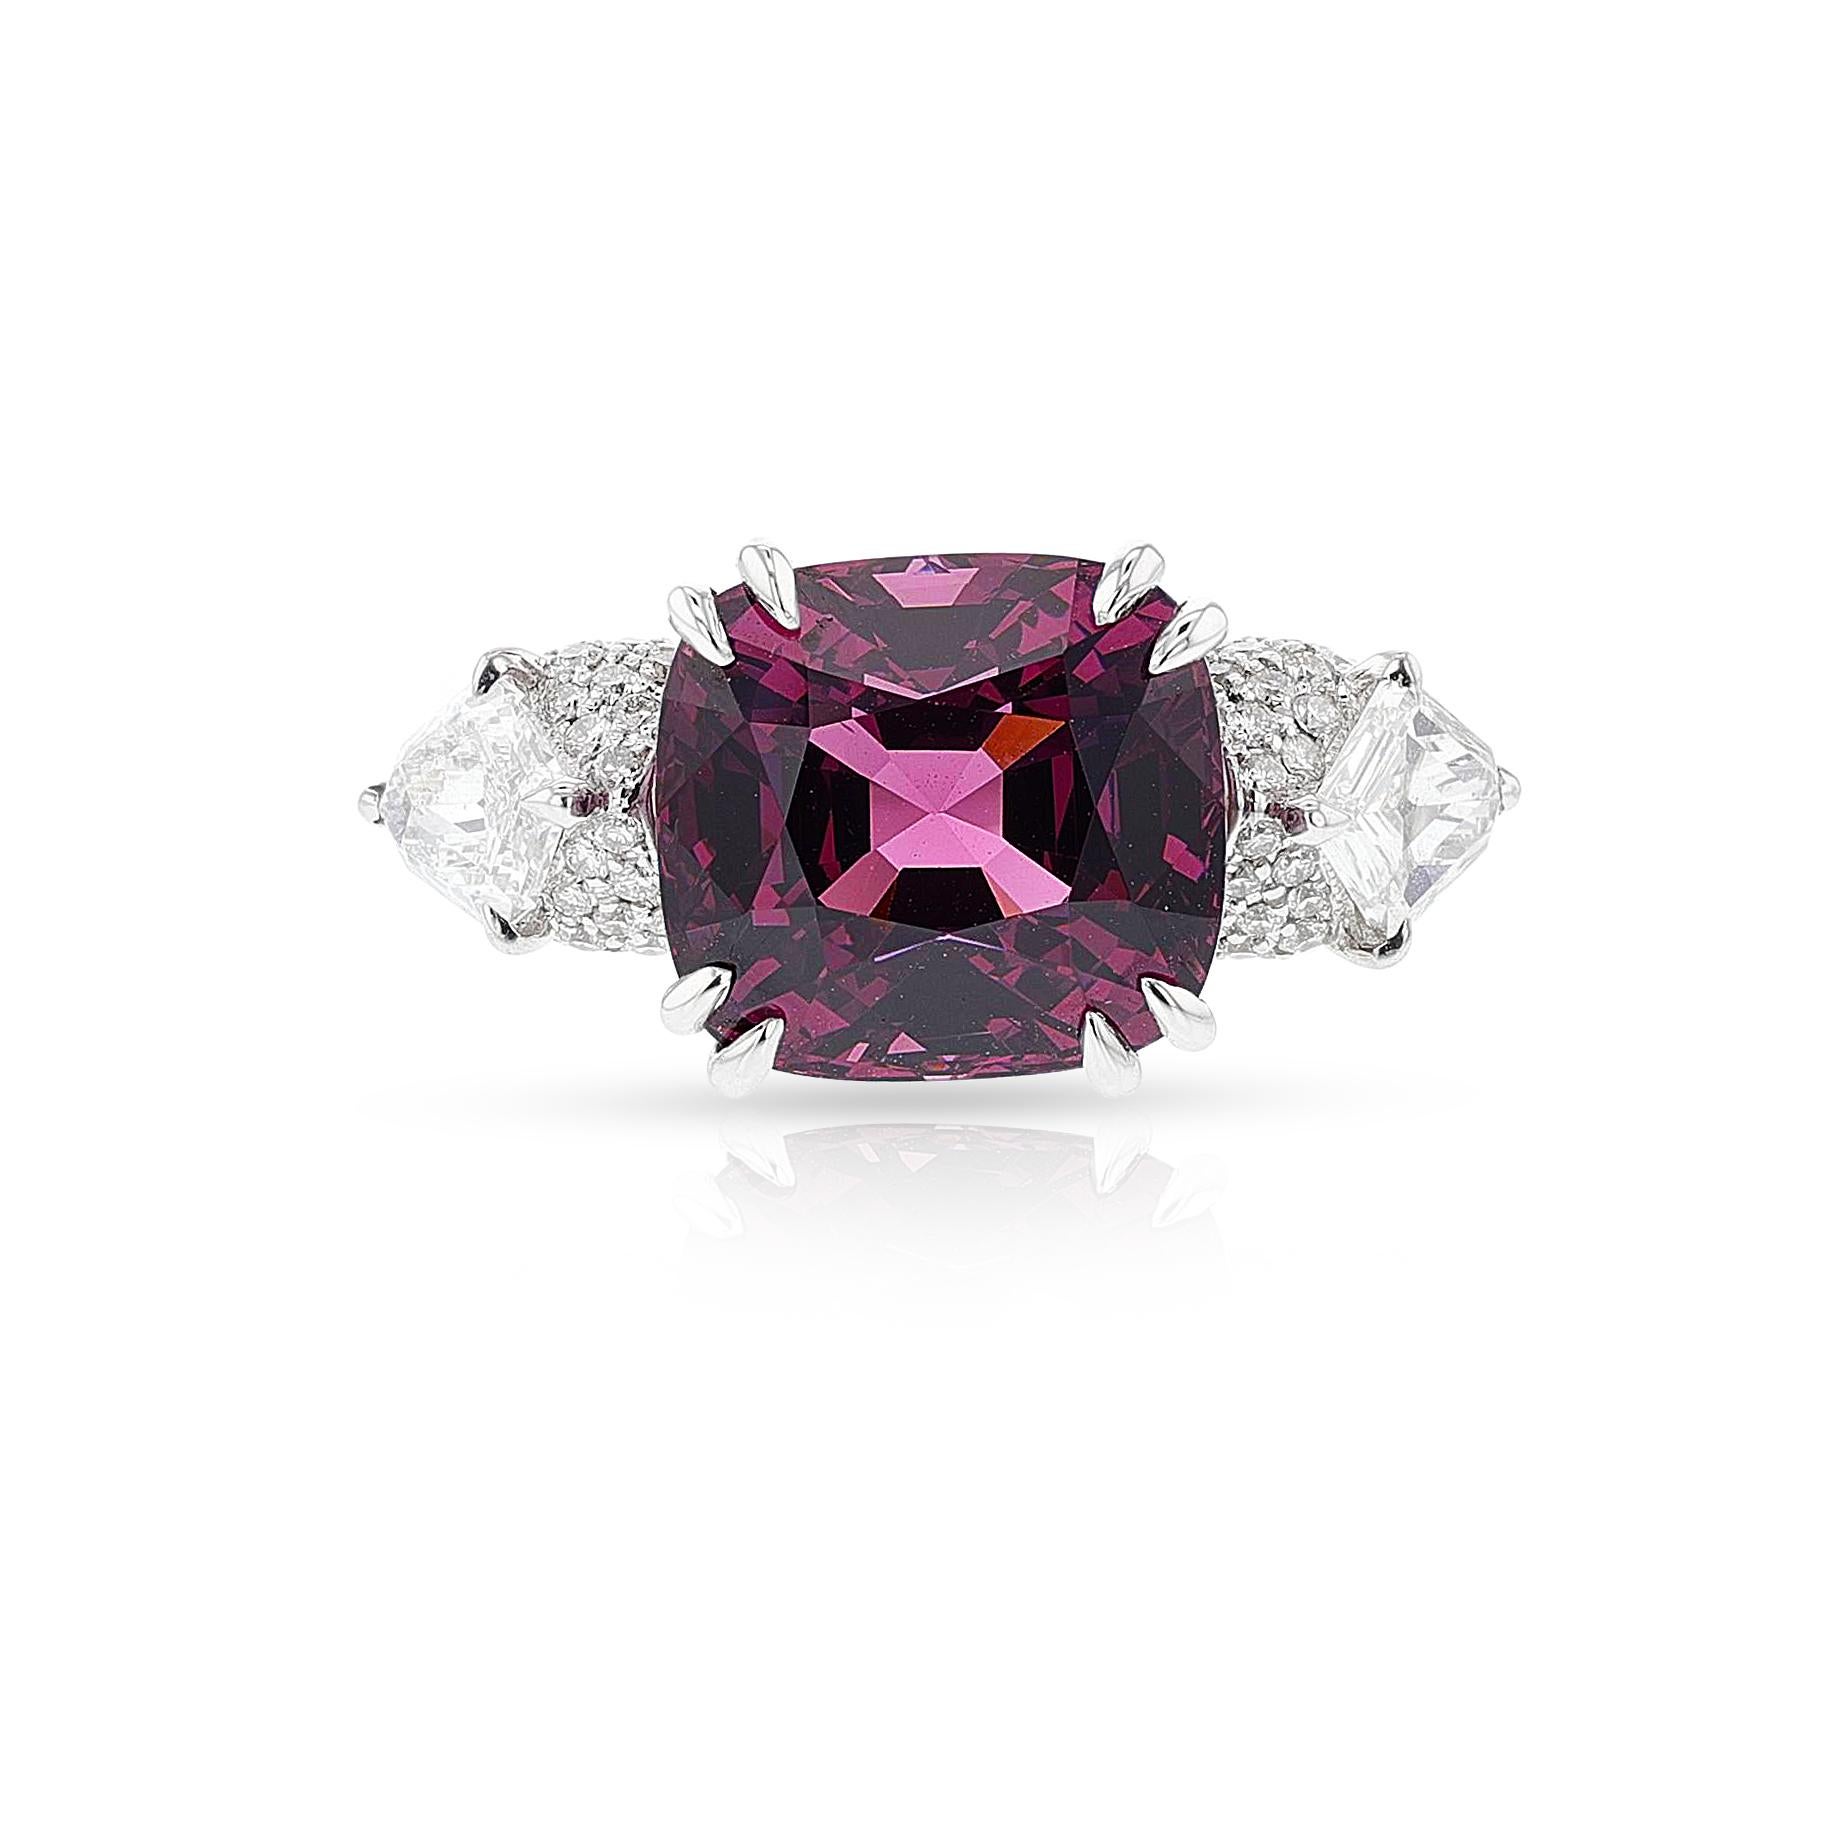 An AGL Certified Ceylon No Heat Purplish Pink Spinel and Diamond Ring made in 18k White Gold. The Ceylon No Heat Pink spinel AGL Certified weighs 10.33 carats, with by two kite-shaped diamonds weighing a total of approximately 1.00 carat, enhanced